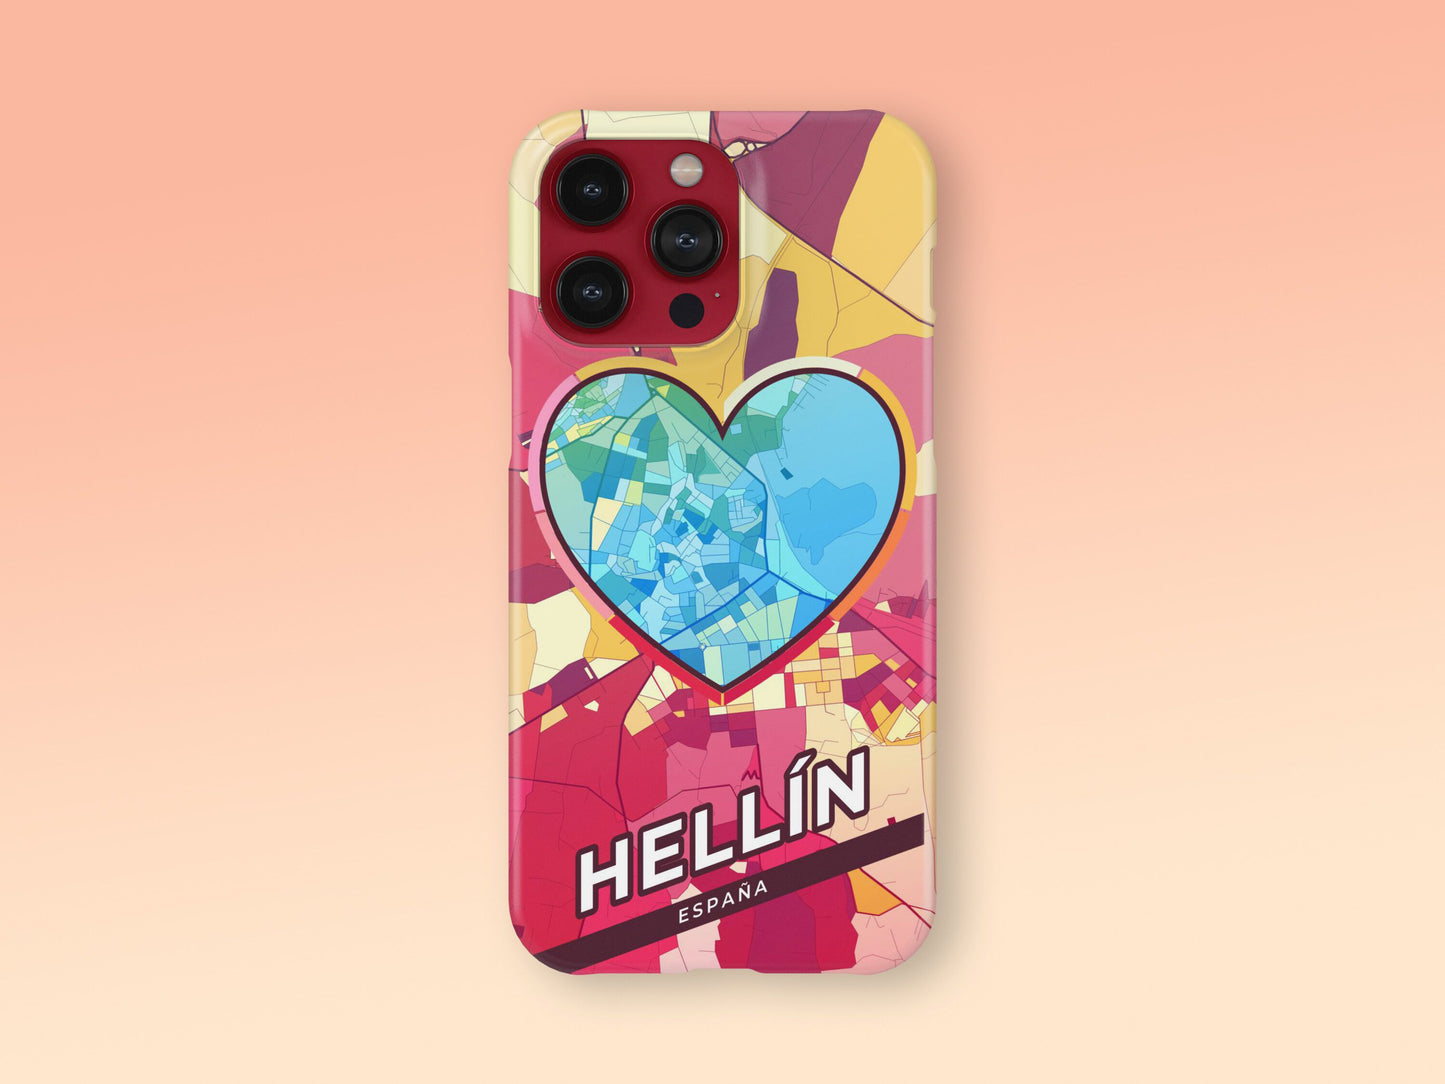 Hellín Spain slim phone case with colorful icon. Birthday, wedding or housewarming gift. Couple match cases. 2